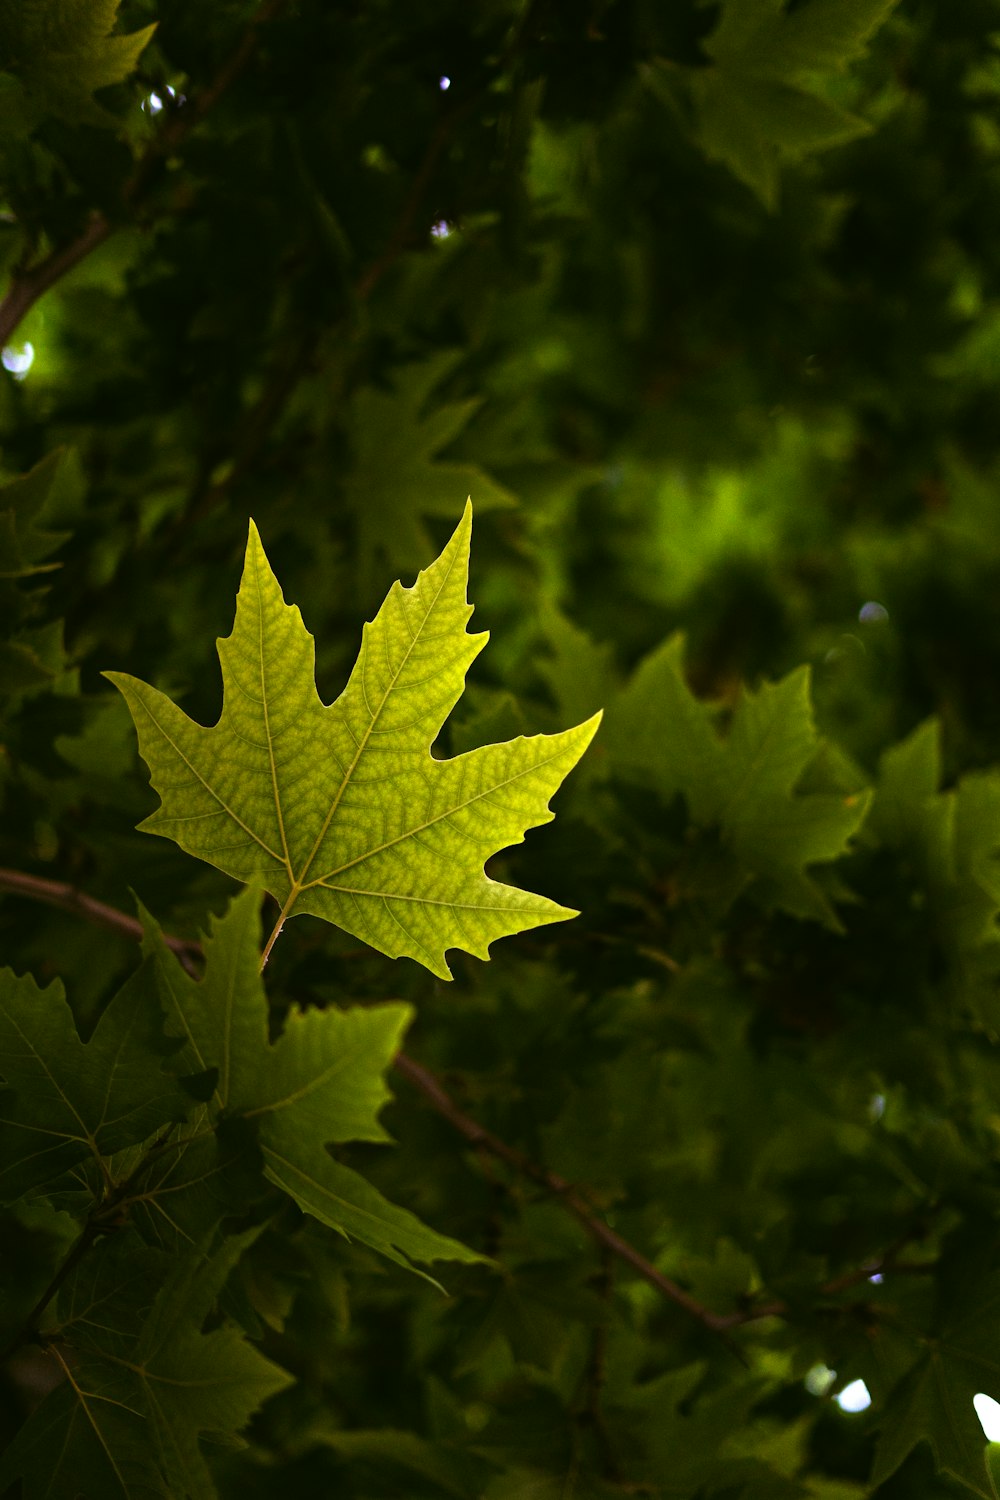 yellow maple leaf in close up photography